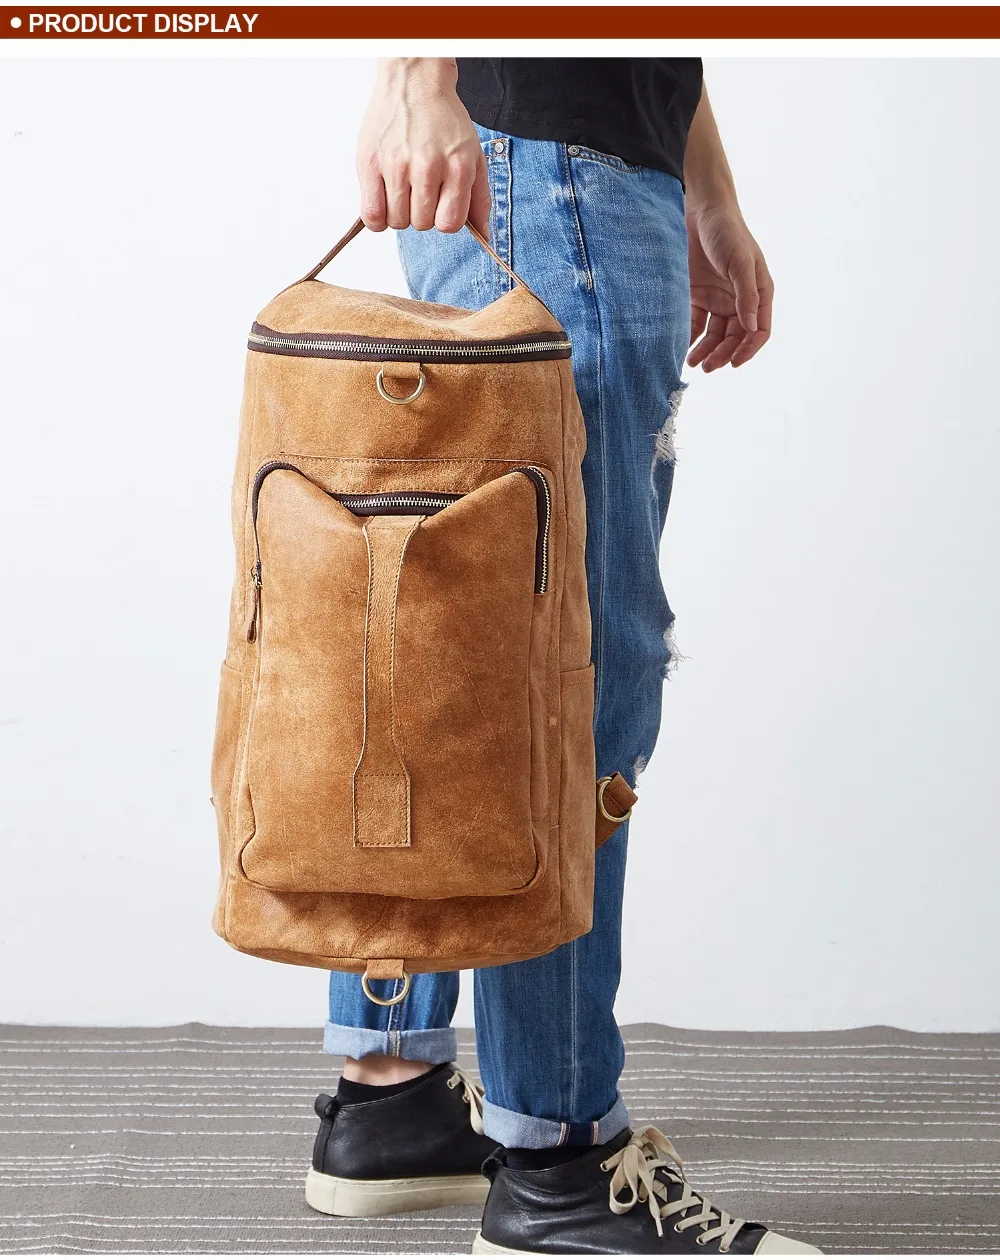 Product Display of Woosir Genuine Leather Cylindrical Backpack